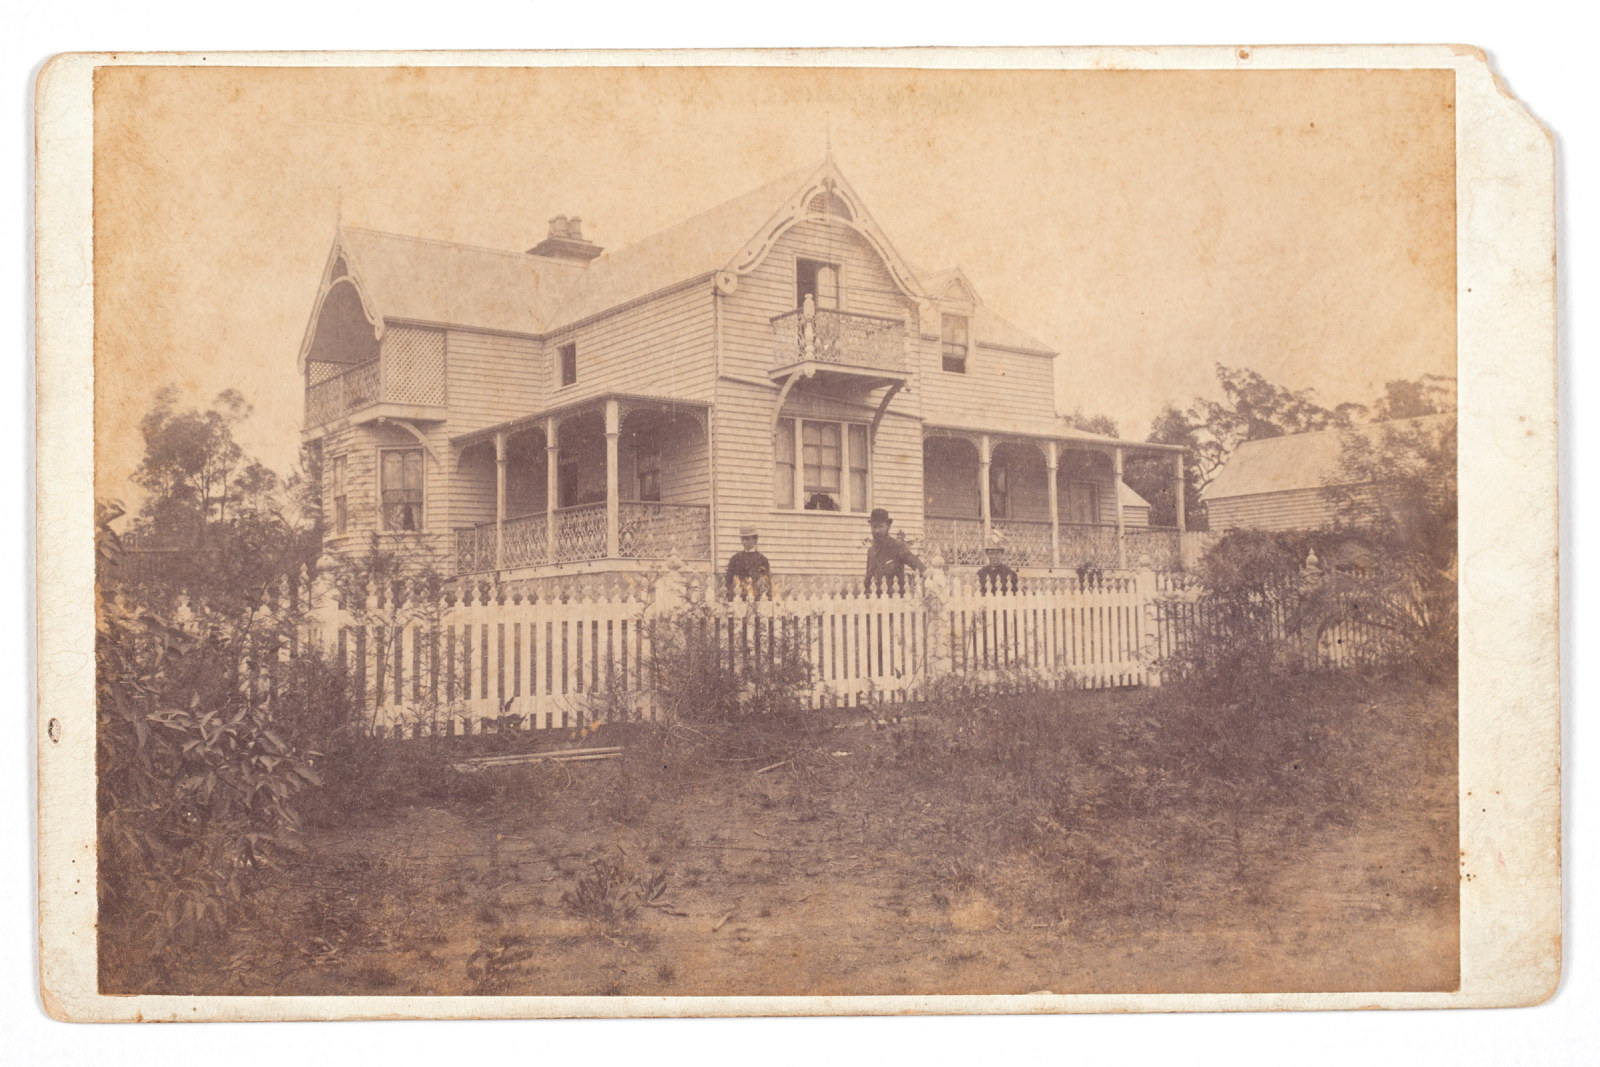 Sepia toned photo of Meroogal house exterior with three figures behind fence.